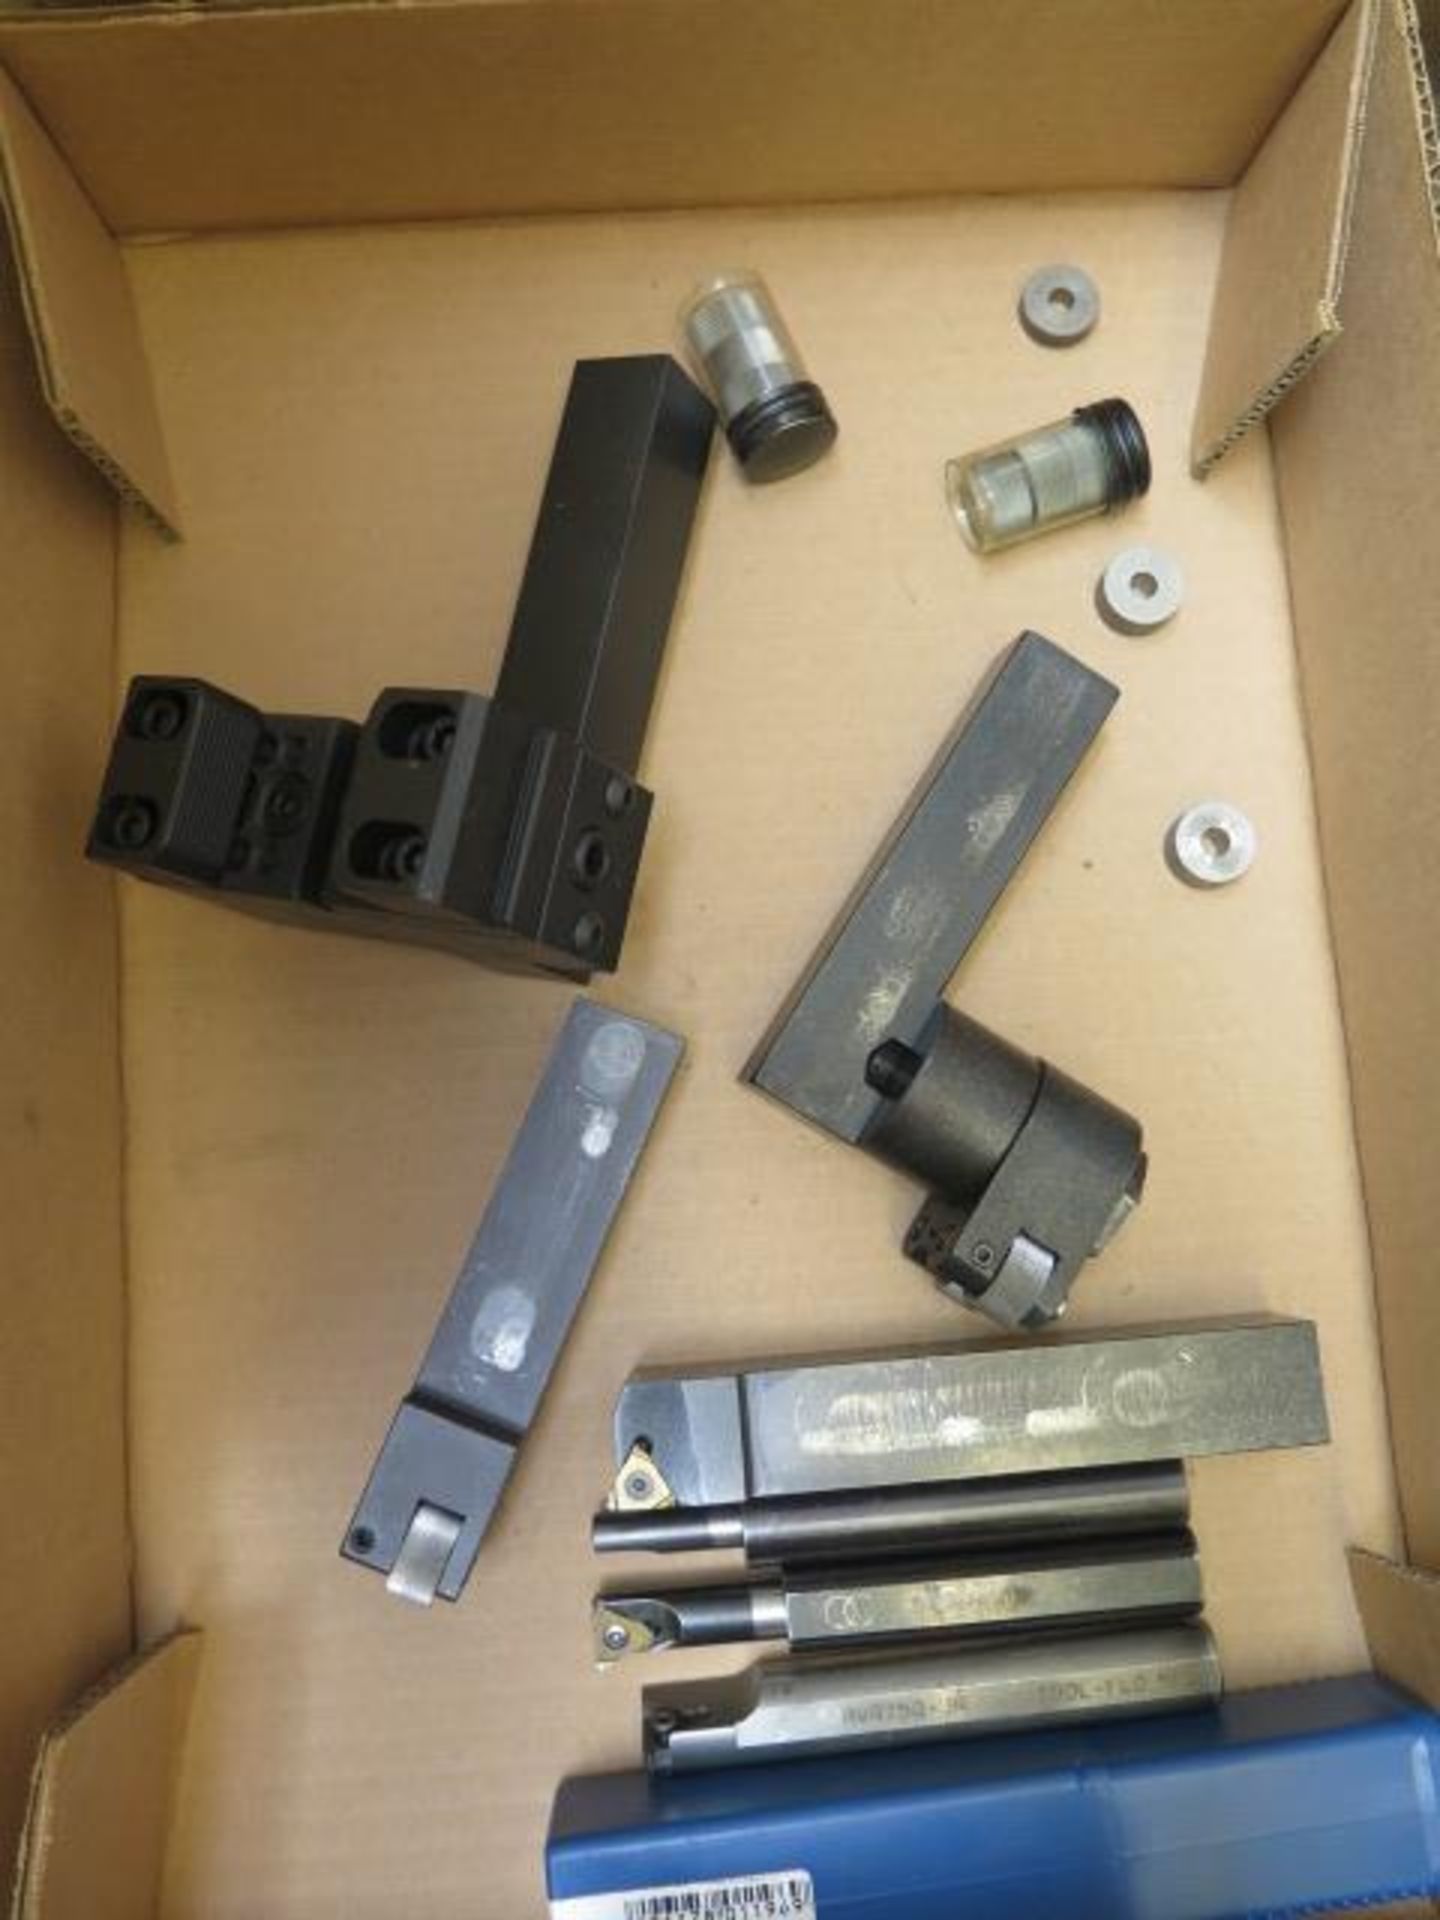 CNC Bar Puller, Knurling Tools and Insert Threading Tools (SOLD AS-IS - NO WARRANTY) - Image 2 of 4